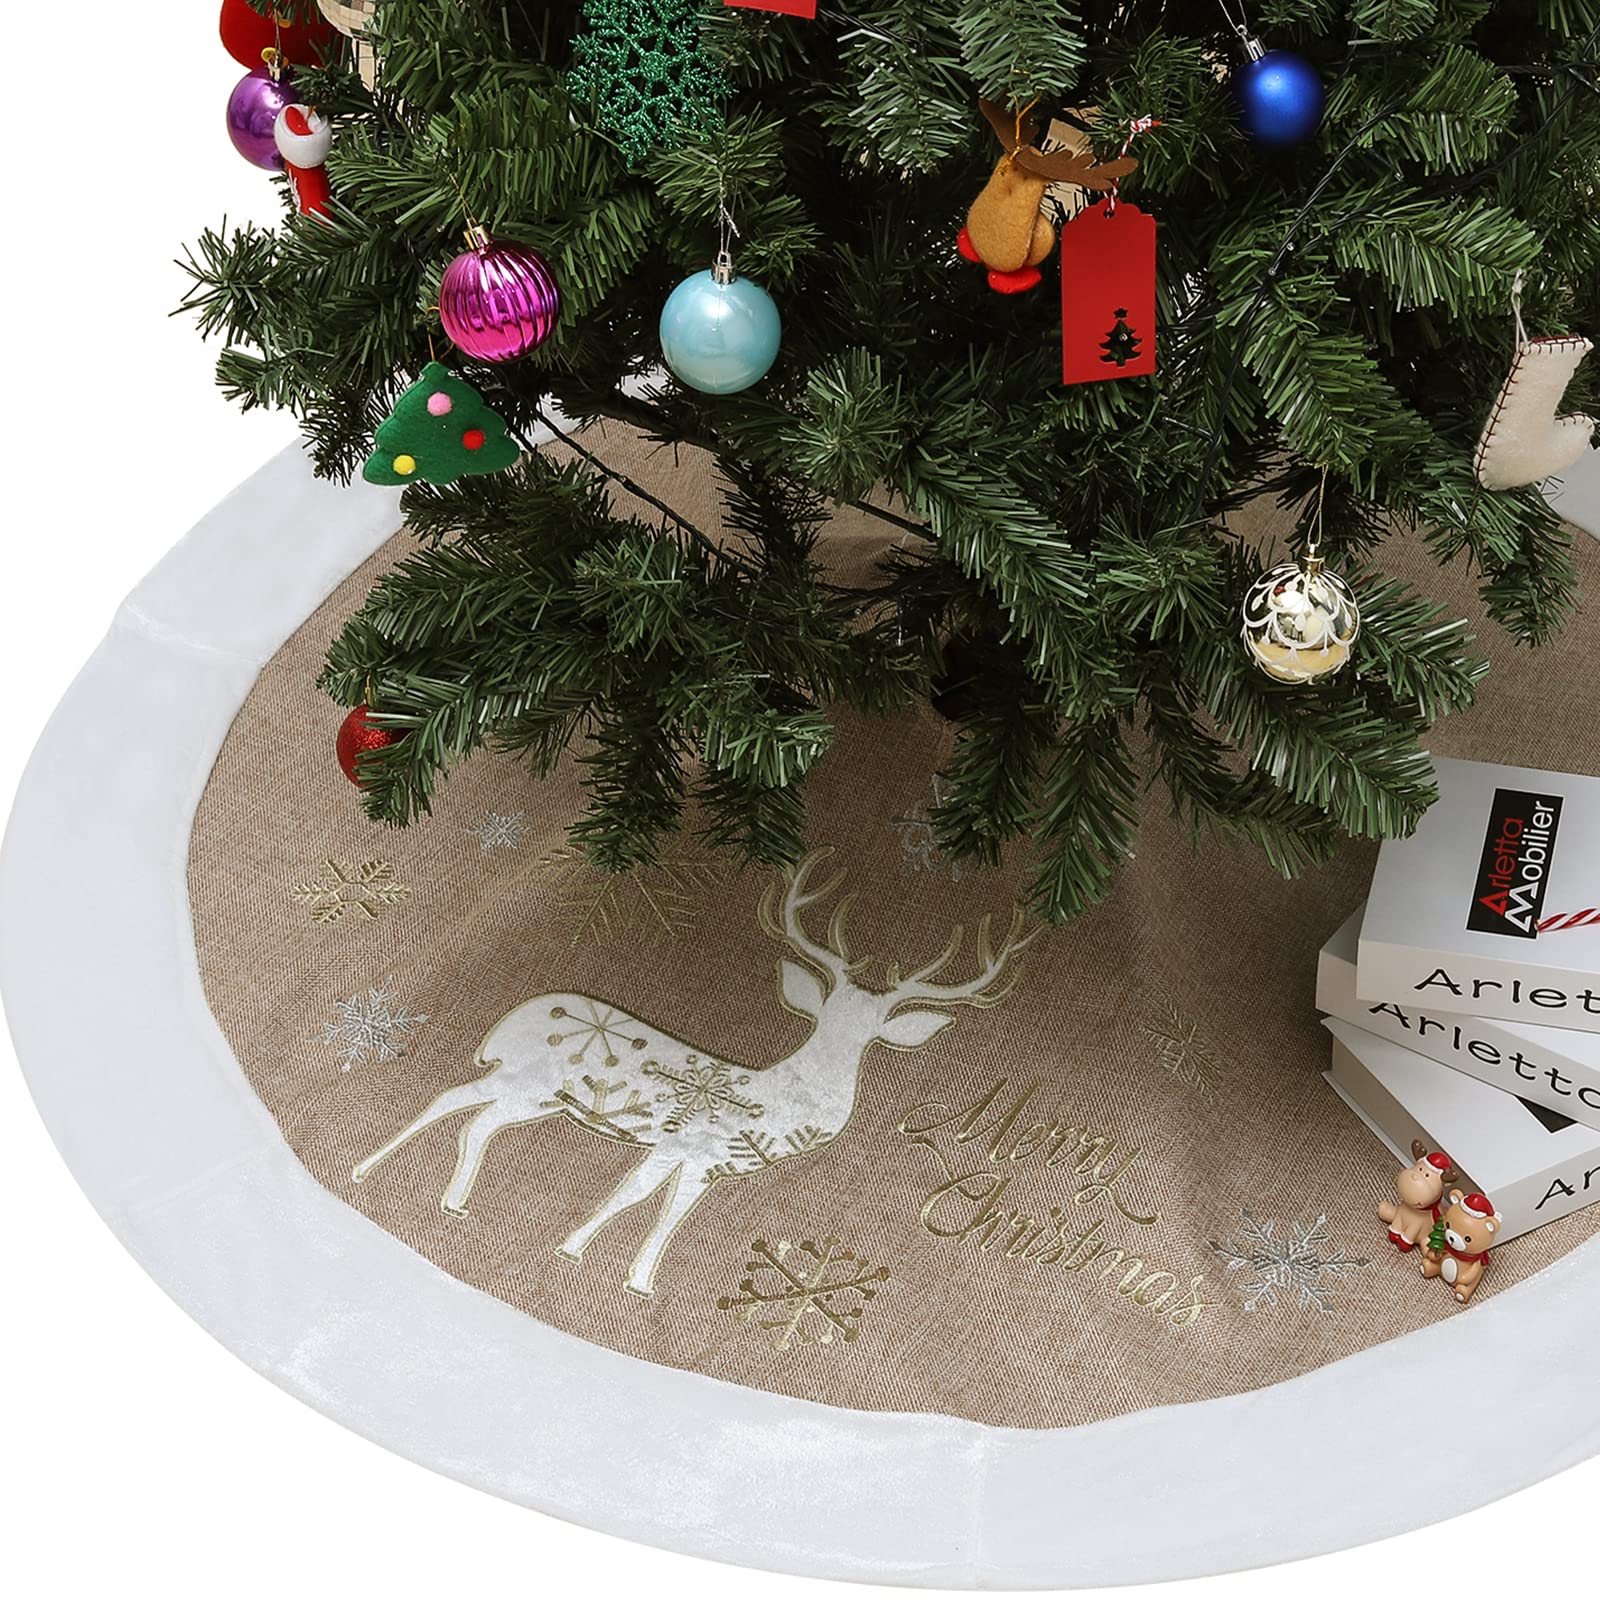 Lewondr christmas Tree Skirt 48 Inch Burlap Embroidery Reindeer Tree Skirt Snowy Mat Decorations Indoors for Holiday Party celeb